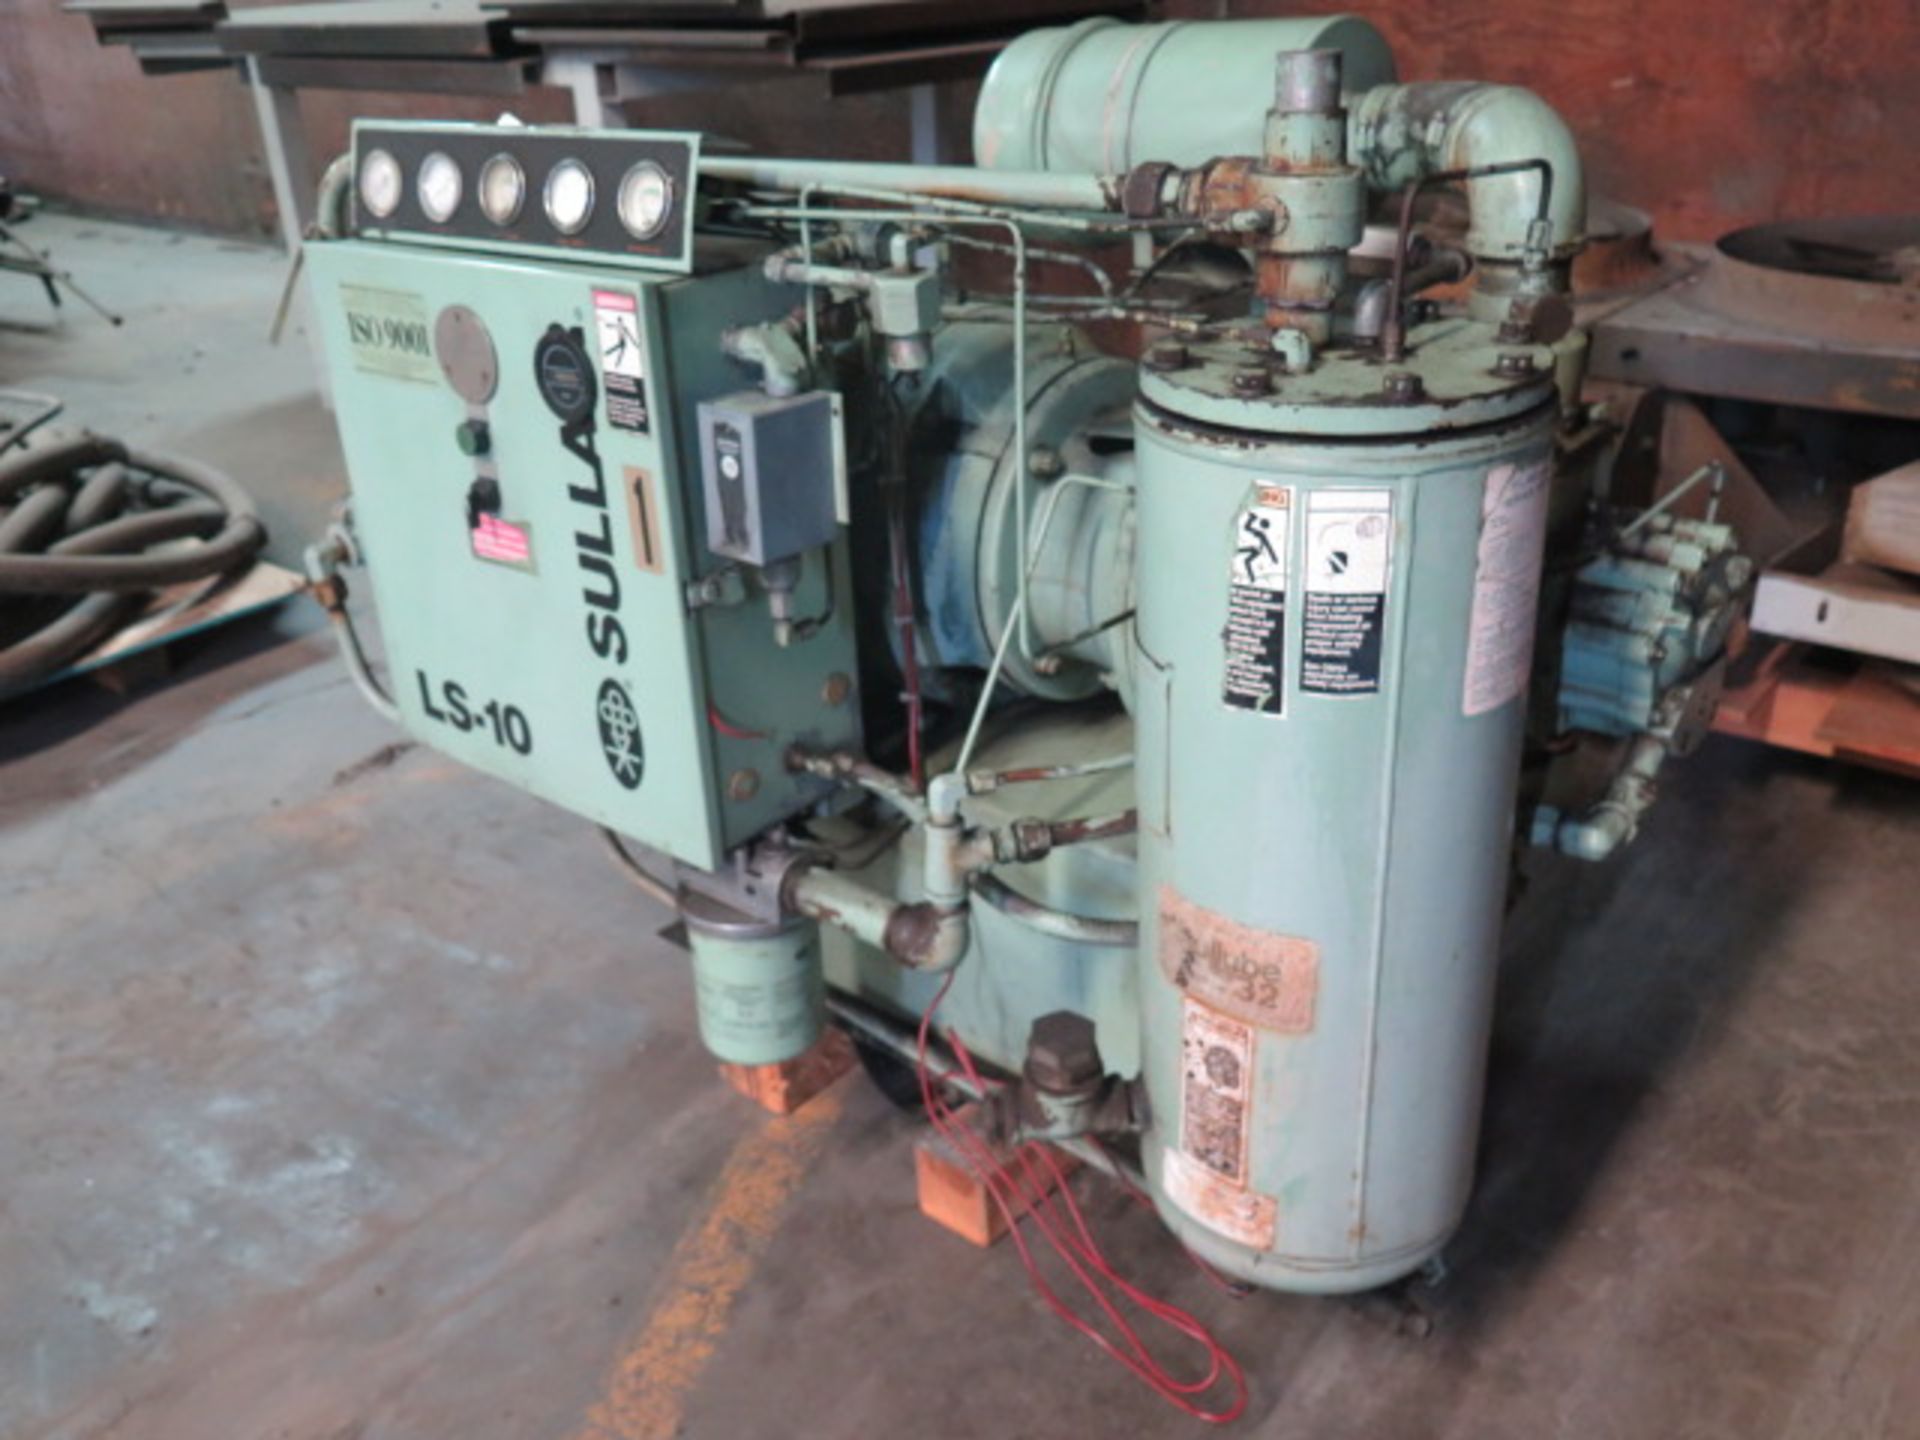 Sullair LS-10 40Hp Rotary Vane Air Compressor (NEEDS MAIN SEAL) w/ 4327 Hours - Image 3 of 7